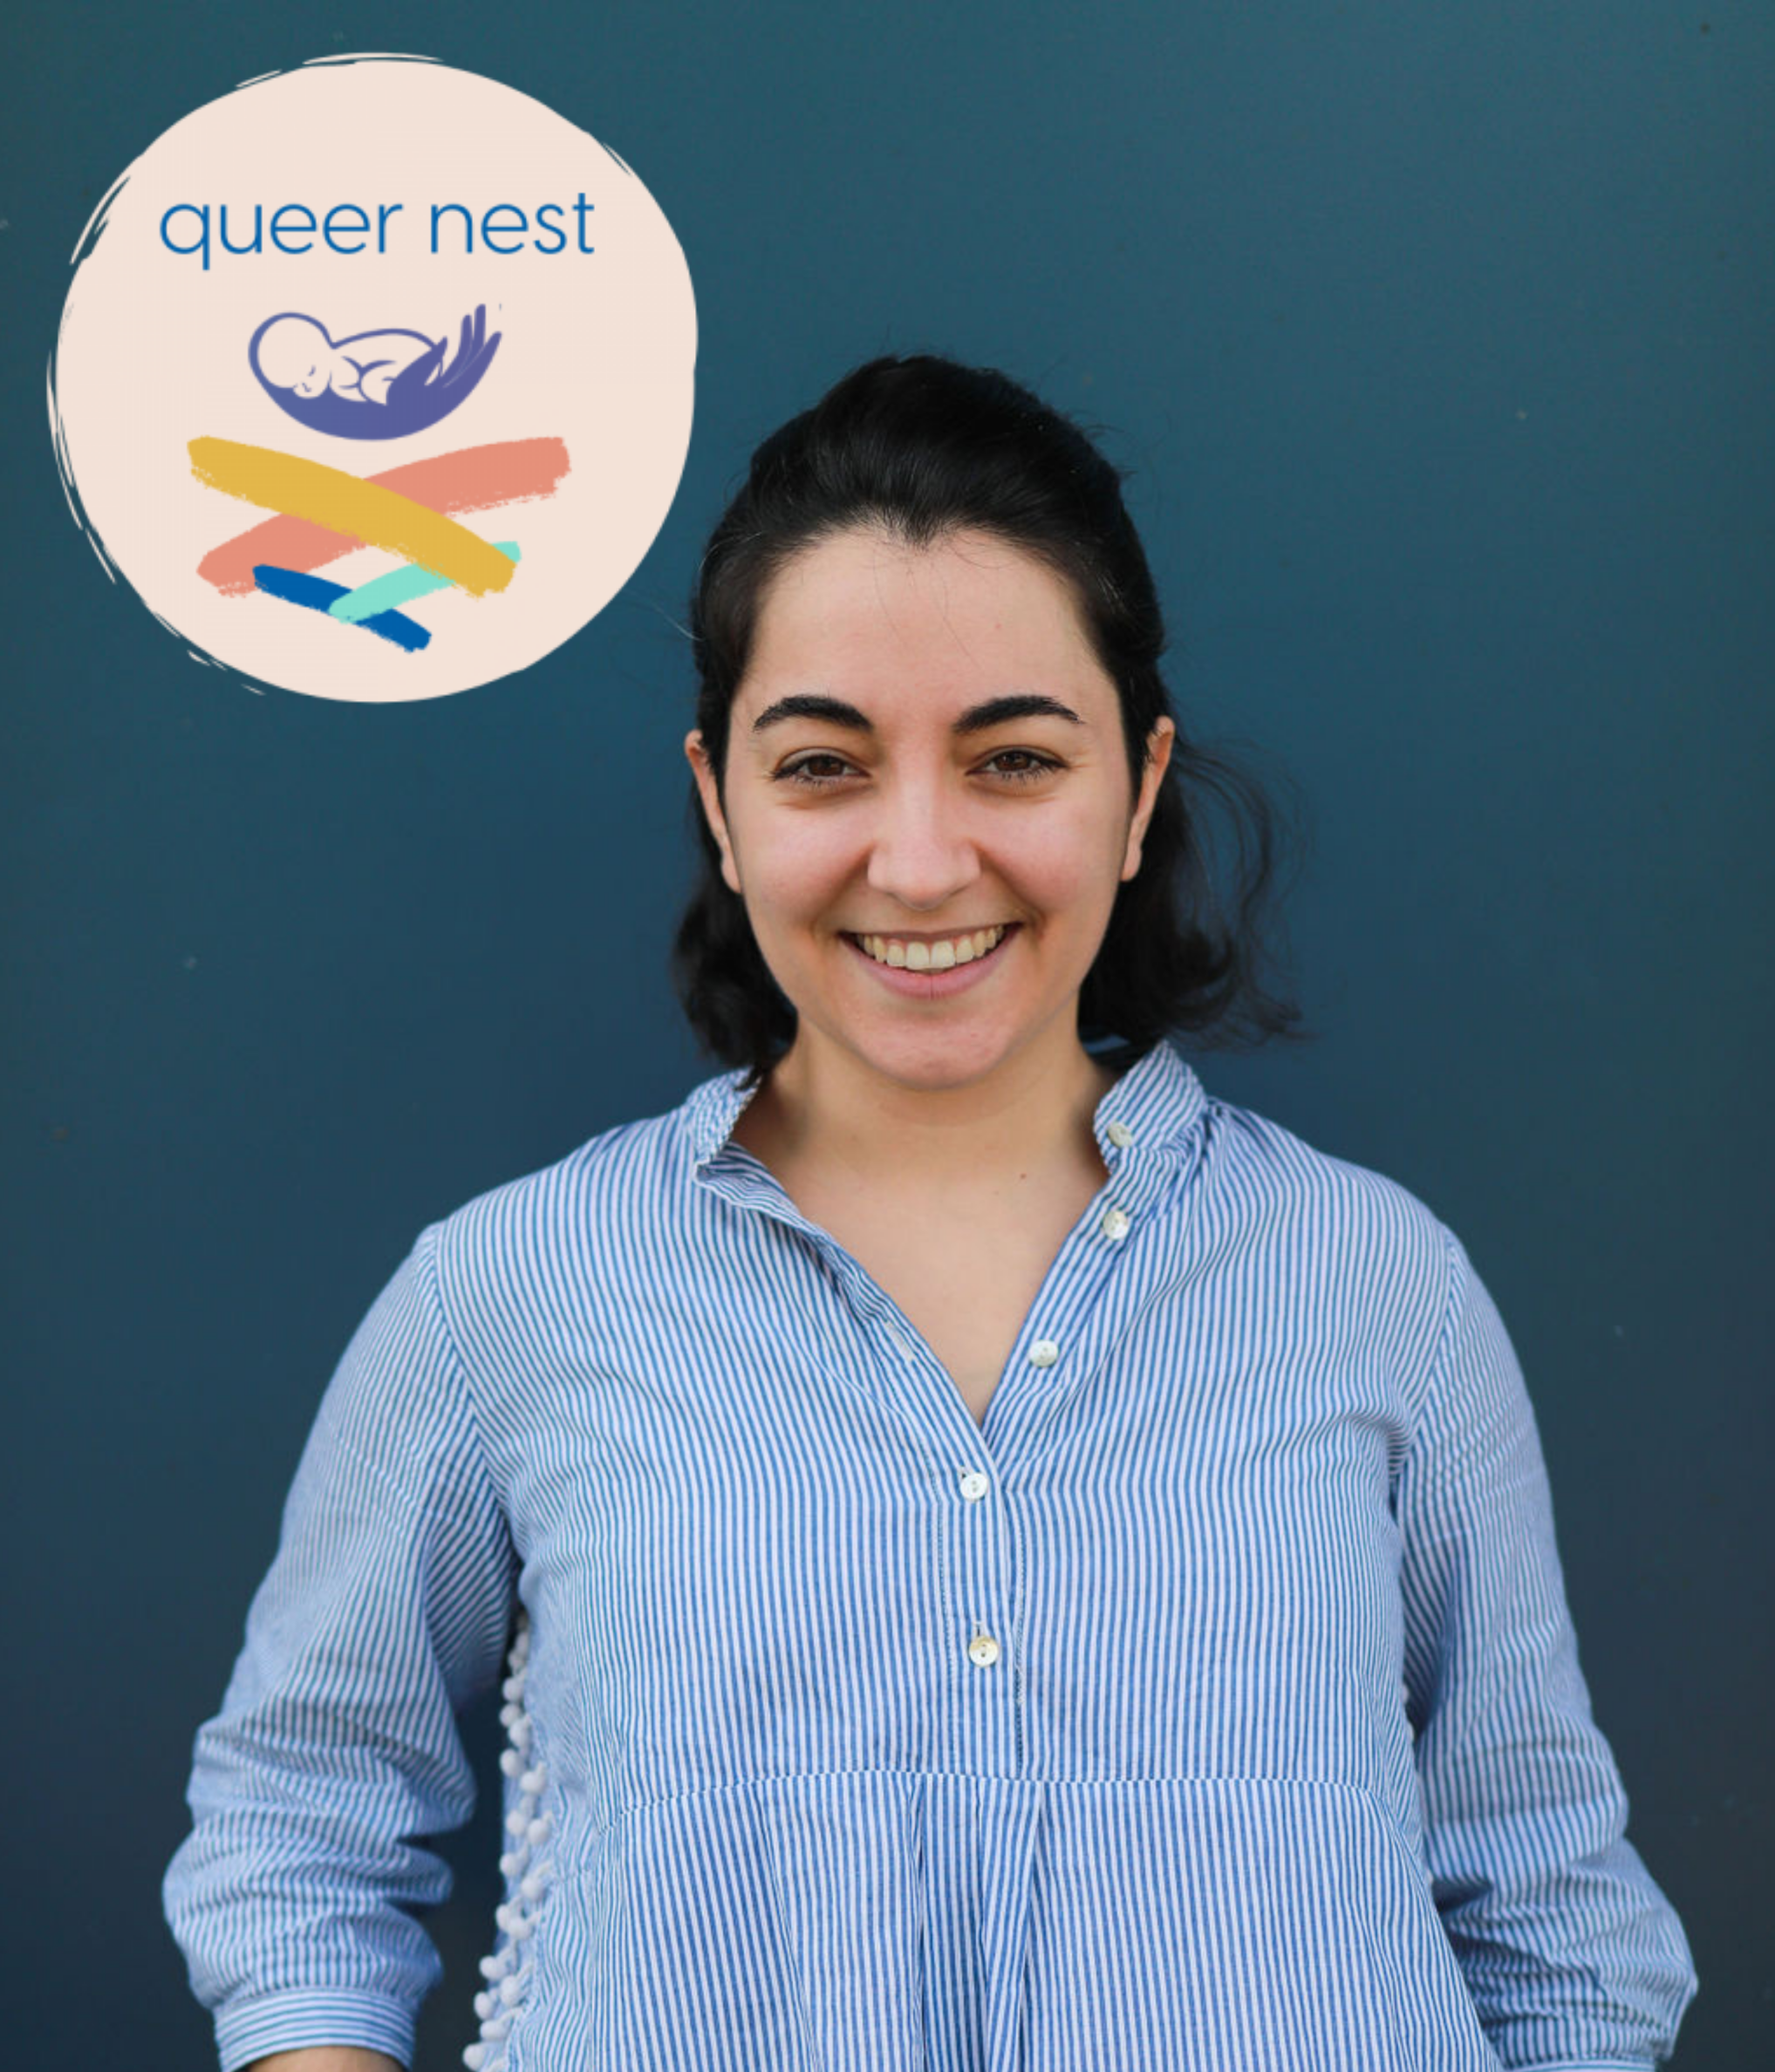 Queer Nest (Naomi Mendes-Pouget, @myqueernest)